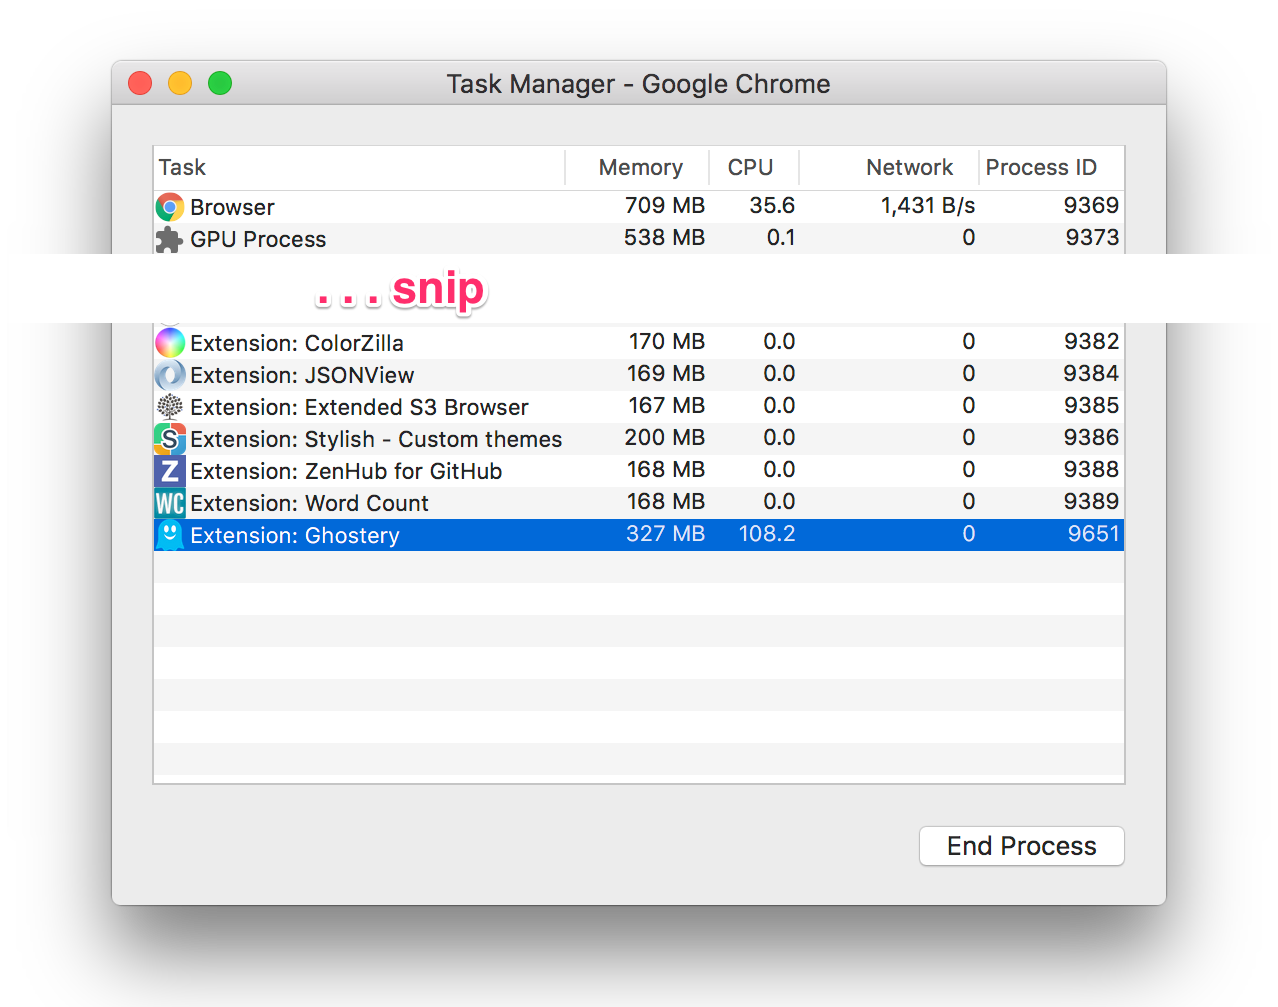 Google Chrome Task Manager showing Ghostery at greater than 100% utilization